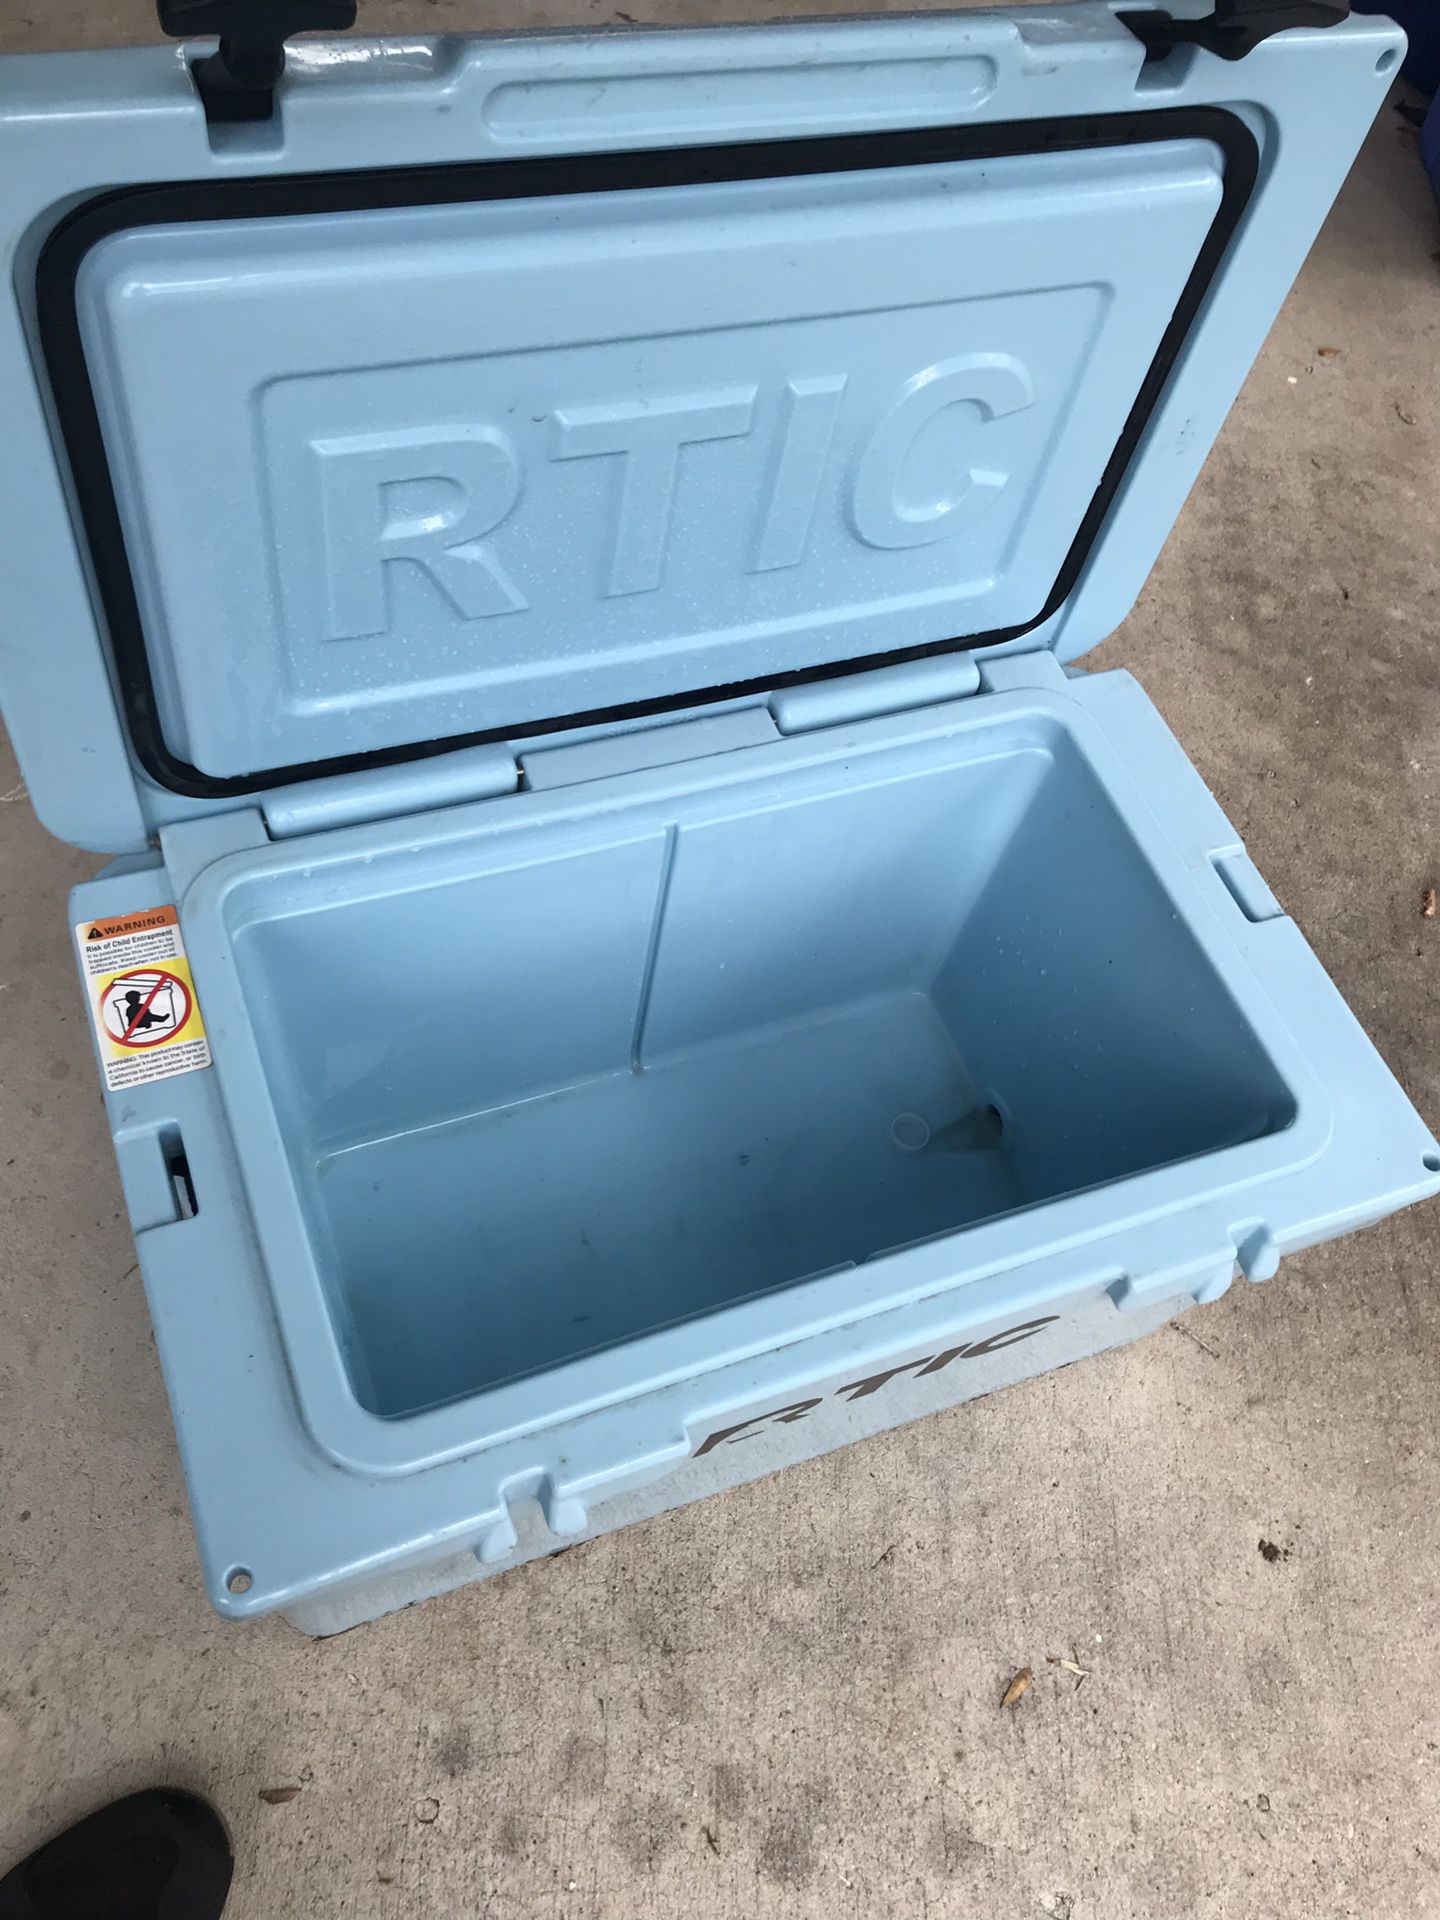 Rtic Thermos for Sale in Virginia Beach, VA - OfferUp